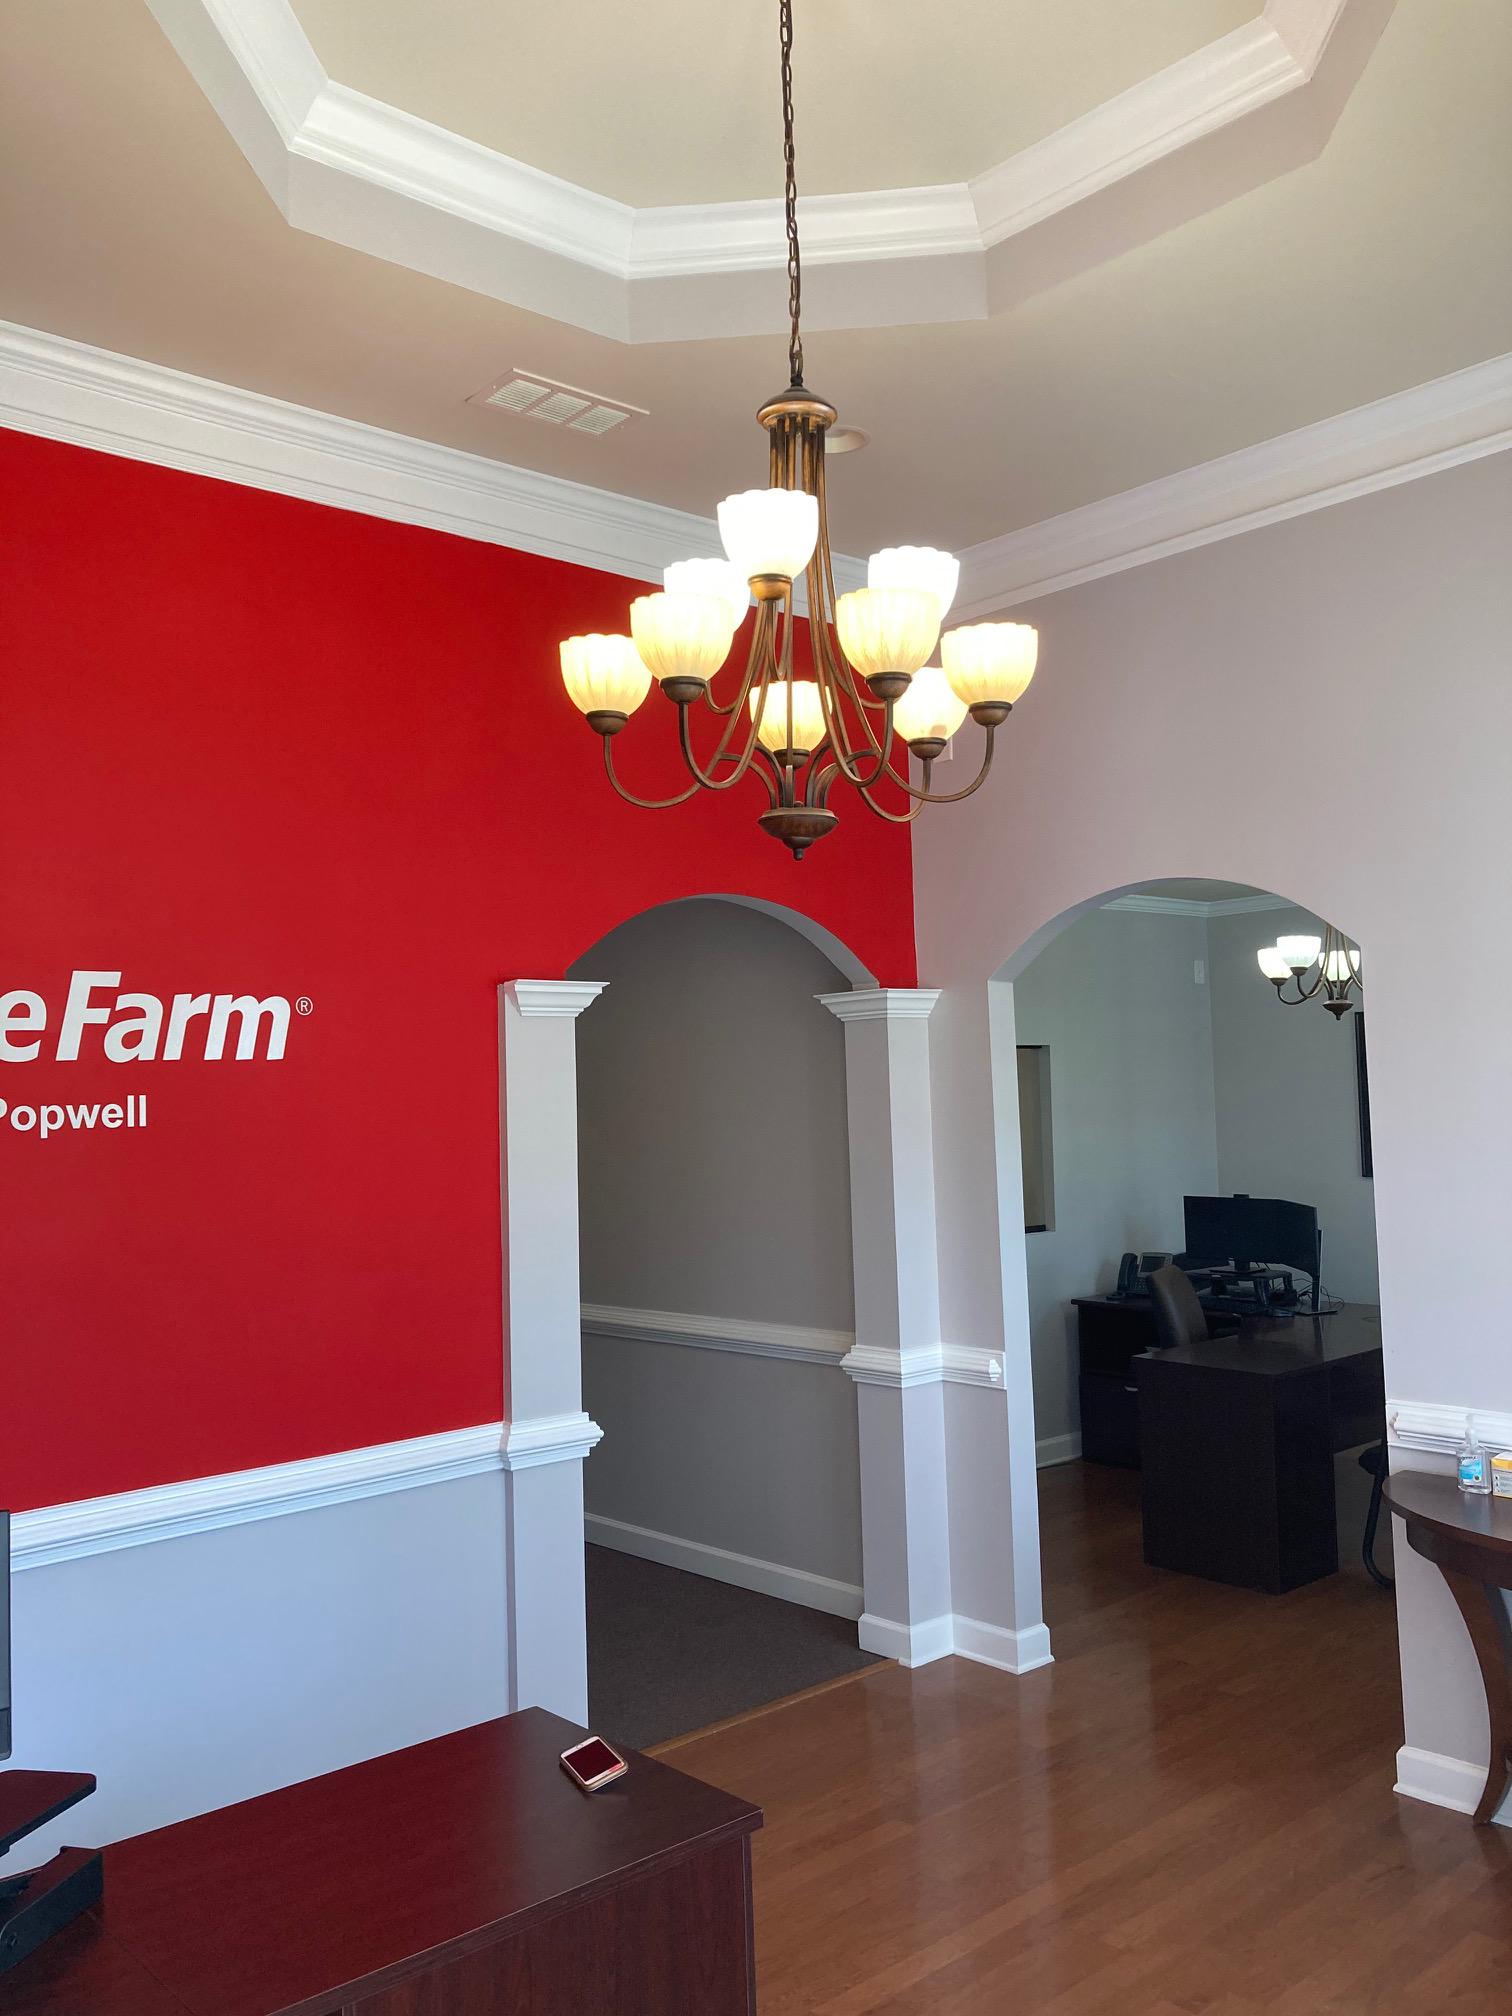 Office entrance. Come by today for a quote! Michael Popwell - State Farm Insurance Agent Suwanee (470)202-6131